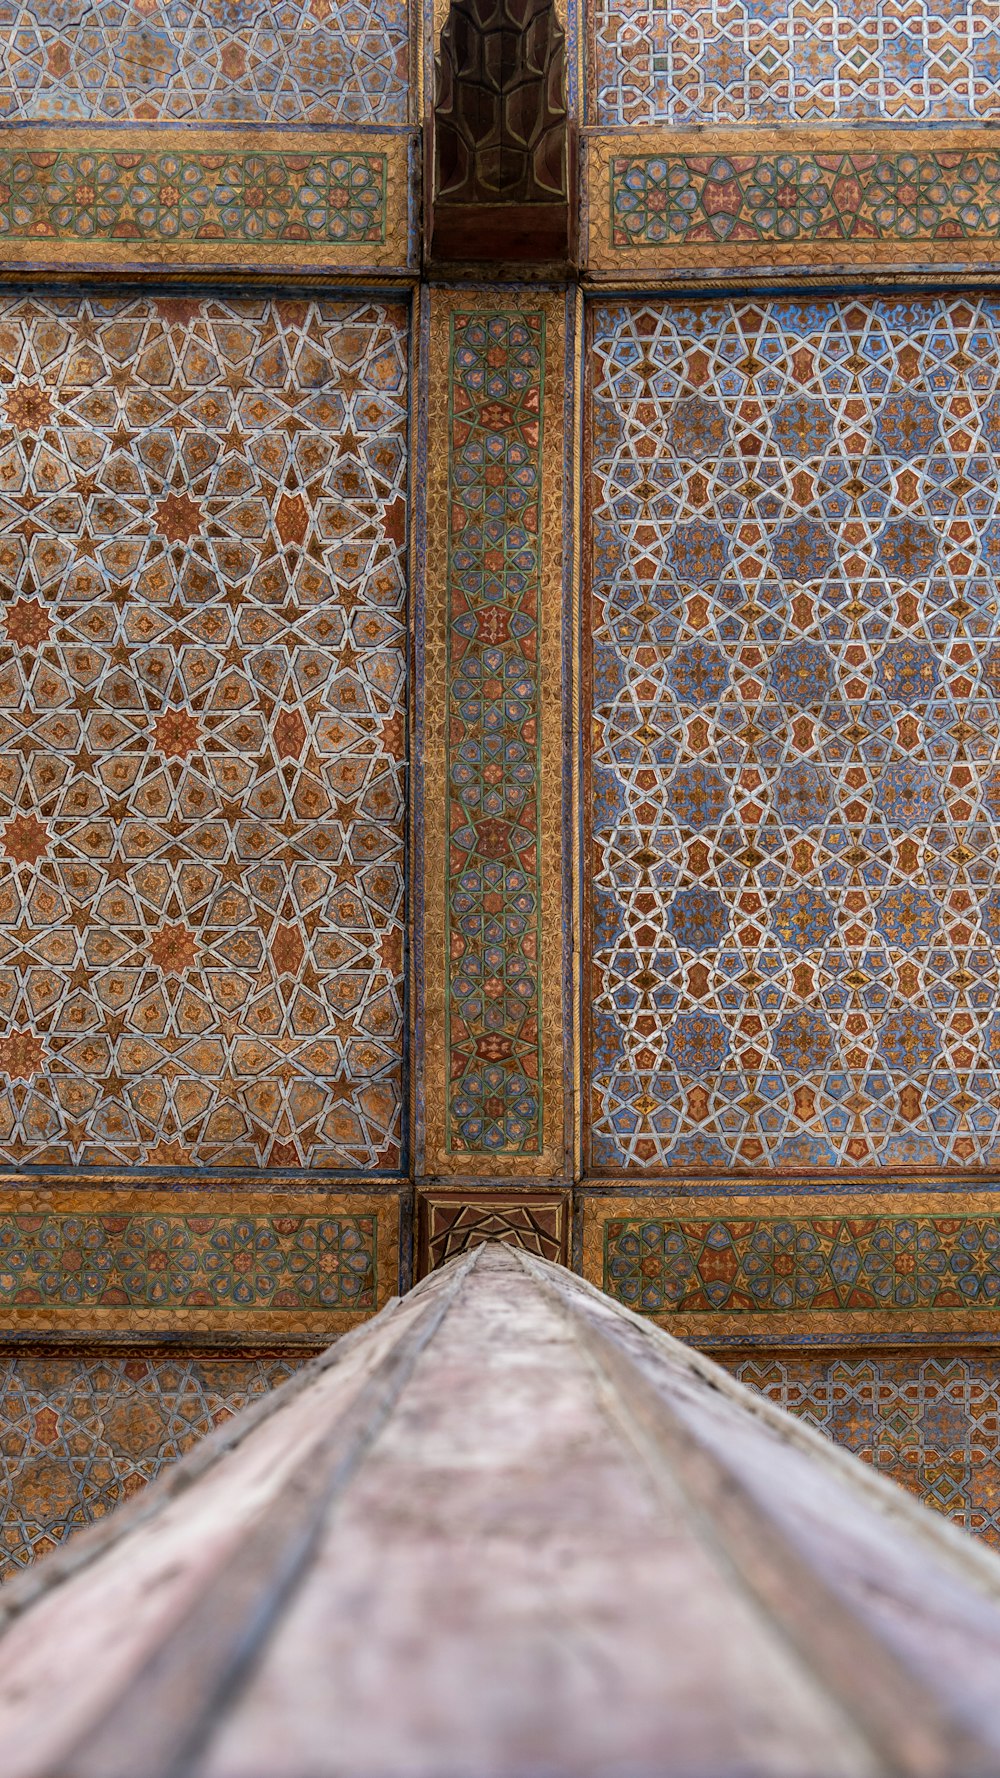 a close up view of a decorative wall